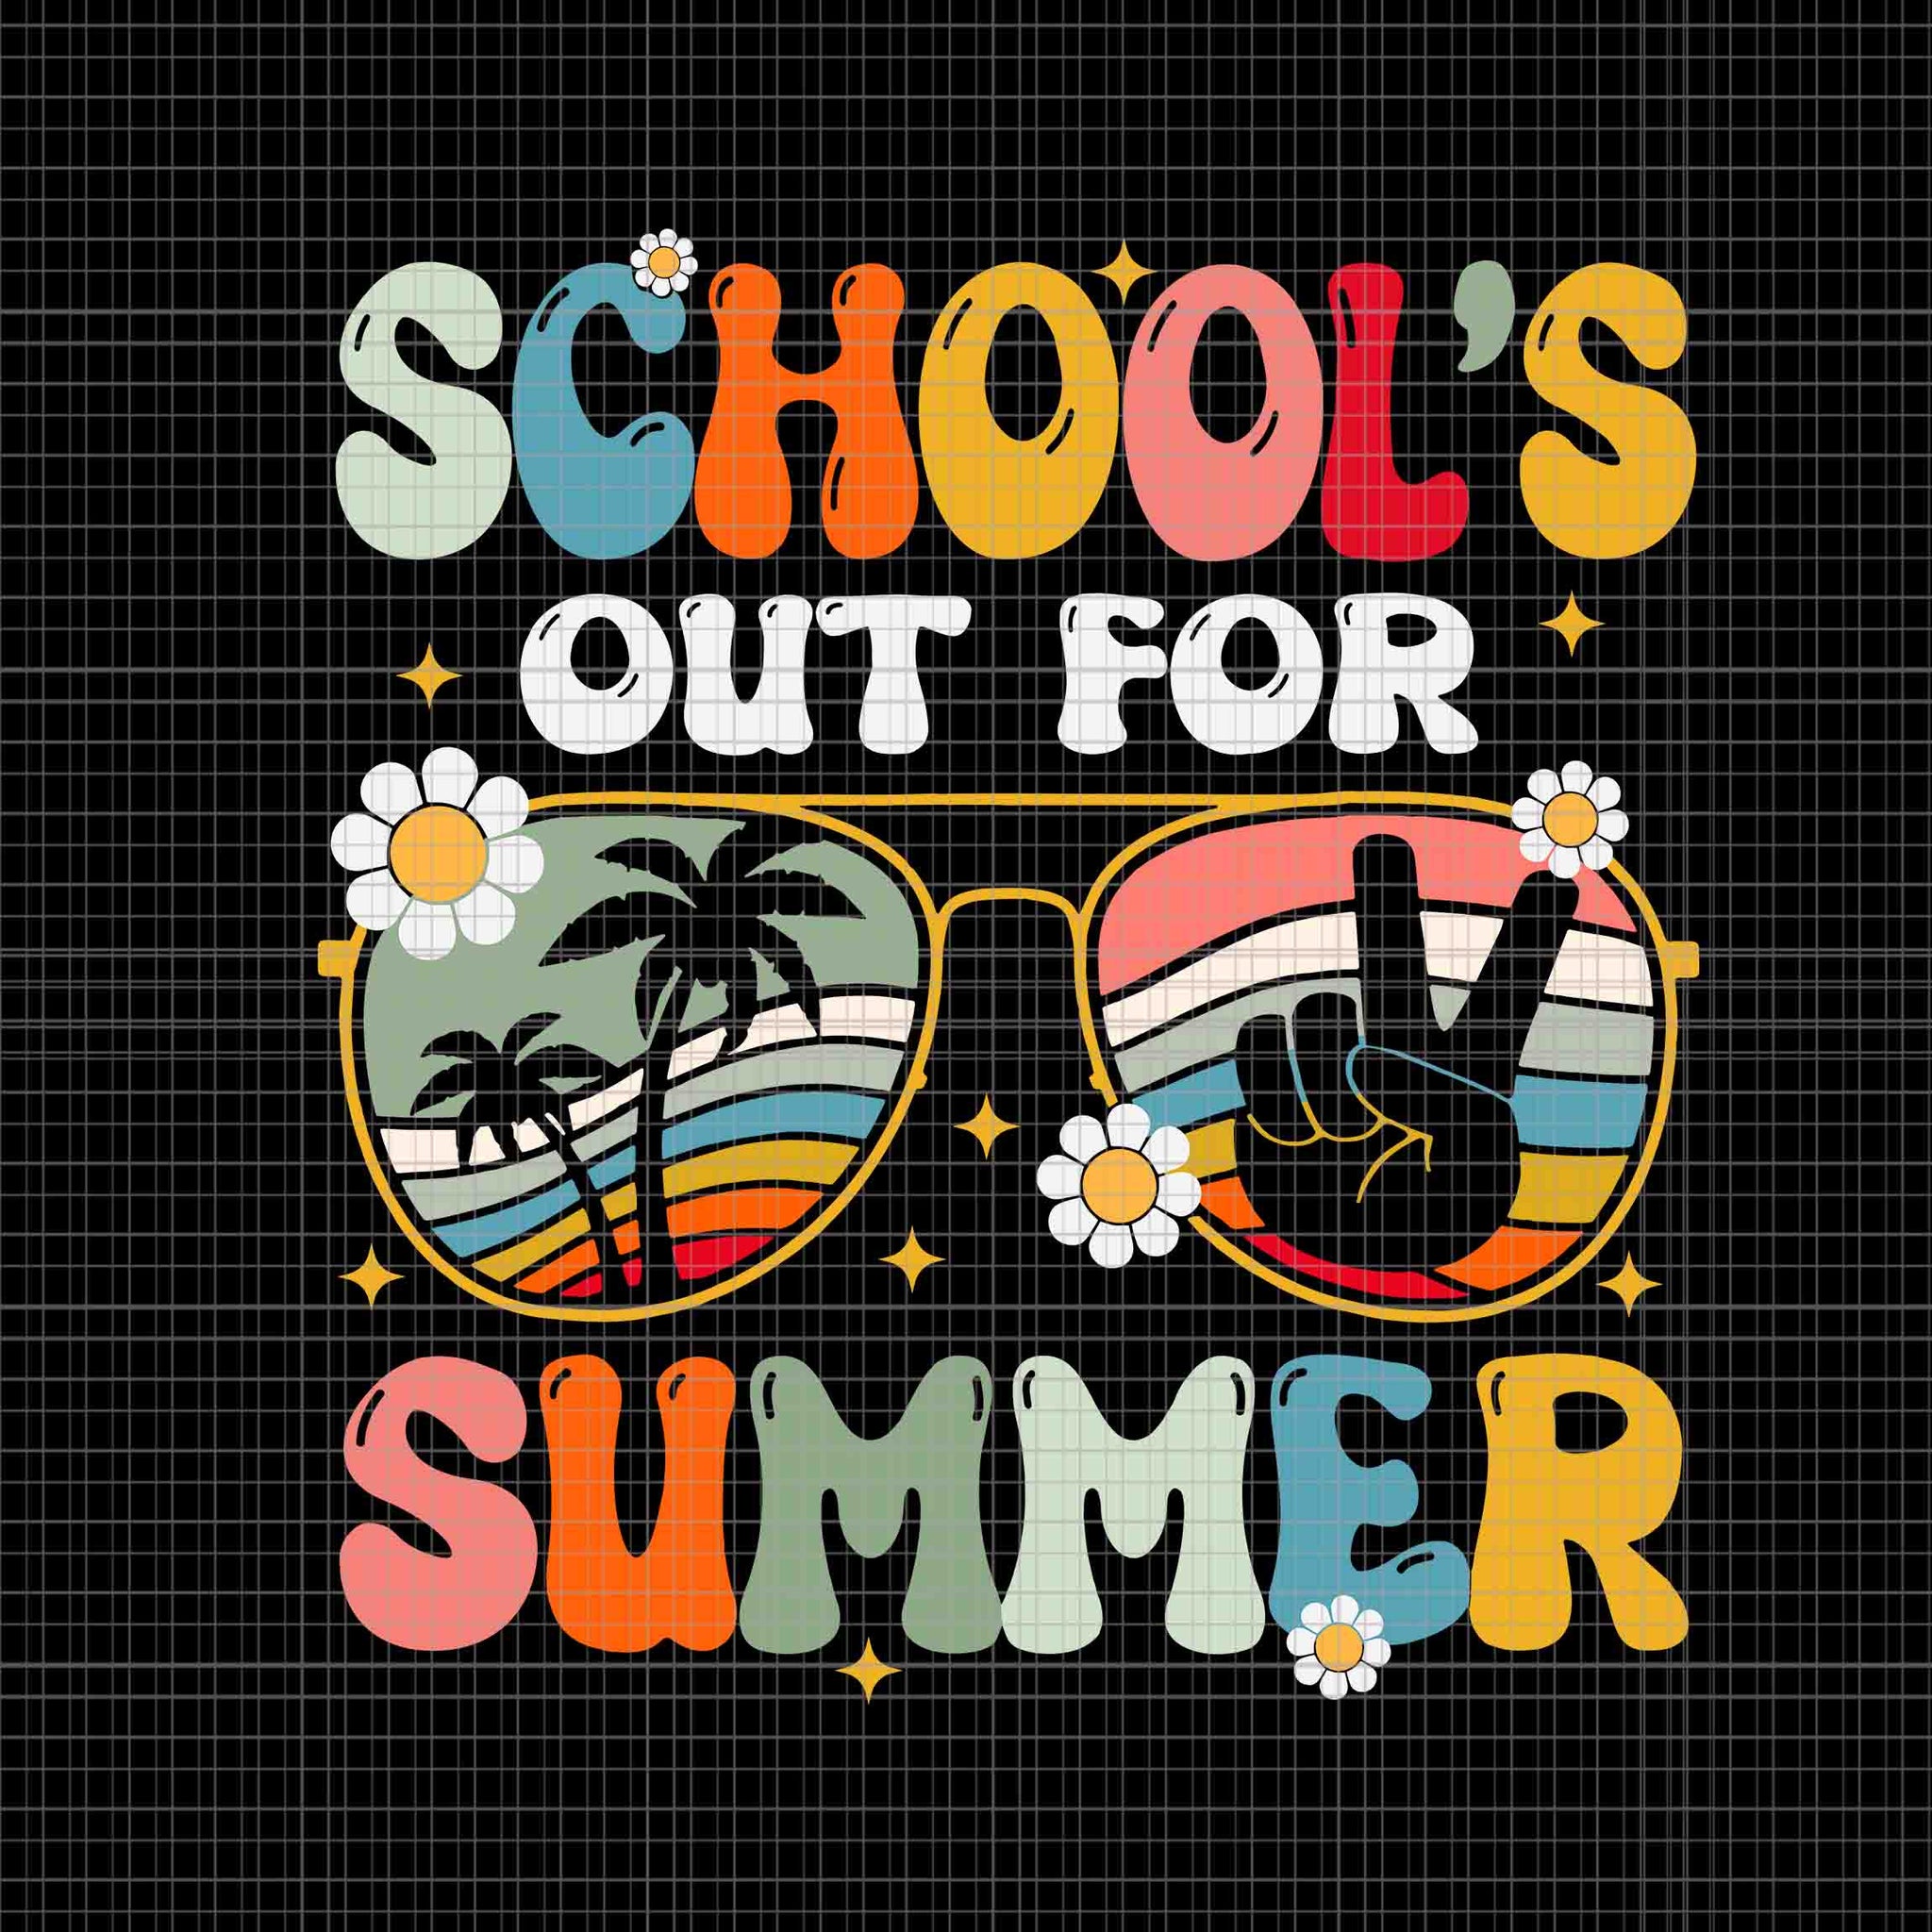 Retro Last Day Of School's Out For Summer Teacher Svg, Last Day of School Svg, Summer School Svg, Last Day Of School Svg